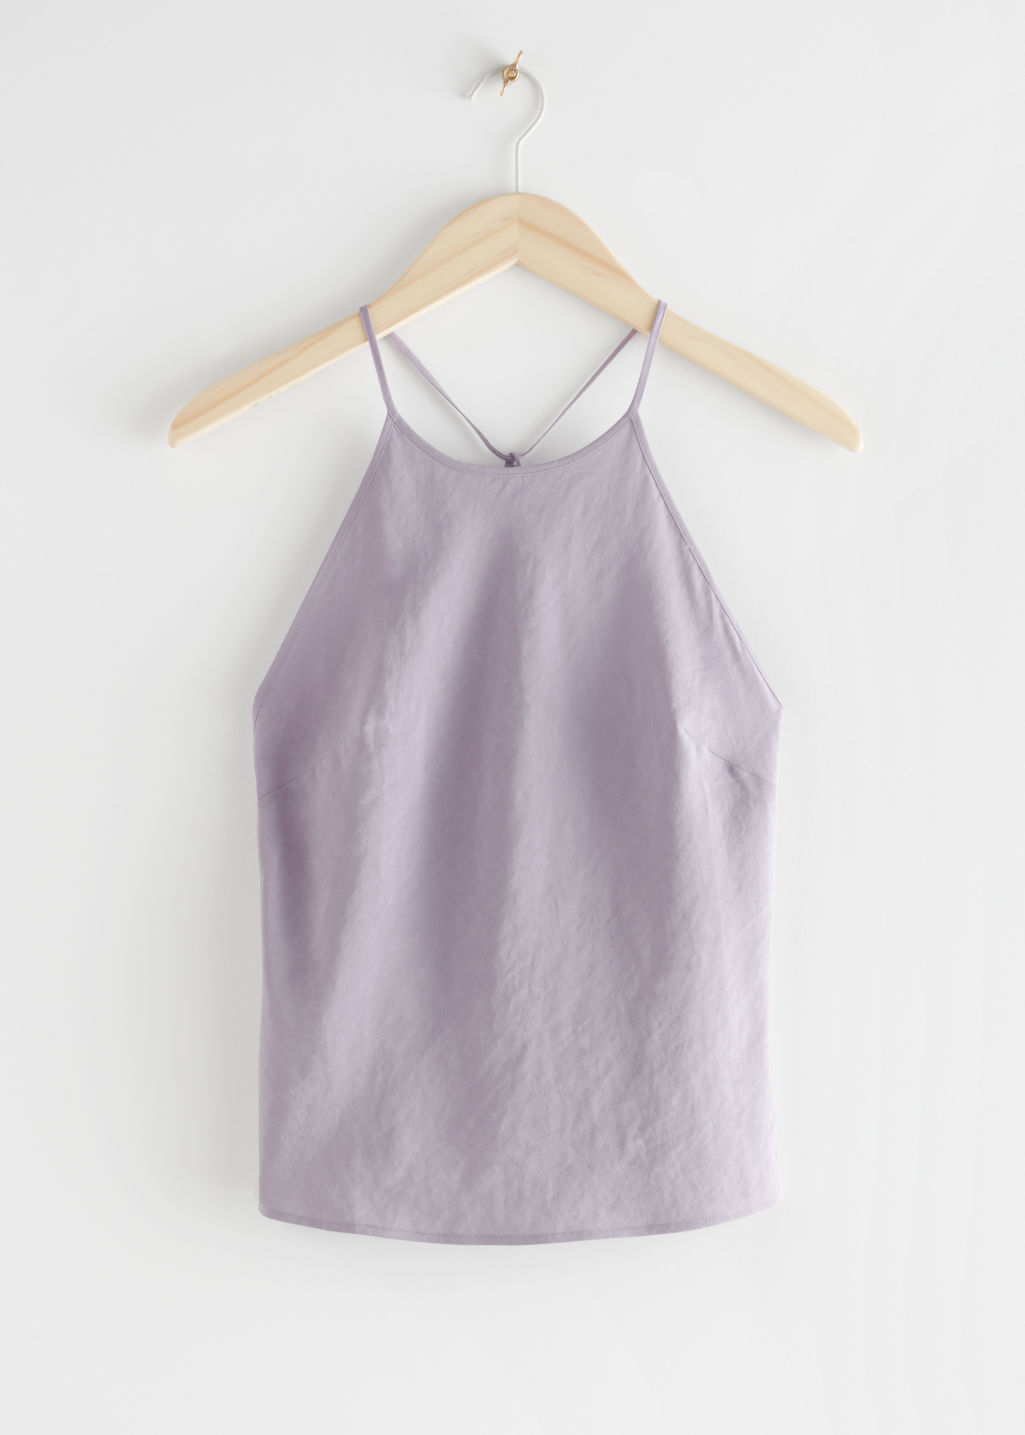 Twisted Strap Top - Lilac - Tanktops & Camisoles - & Other Stories